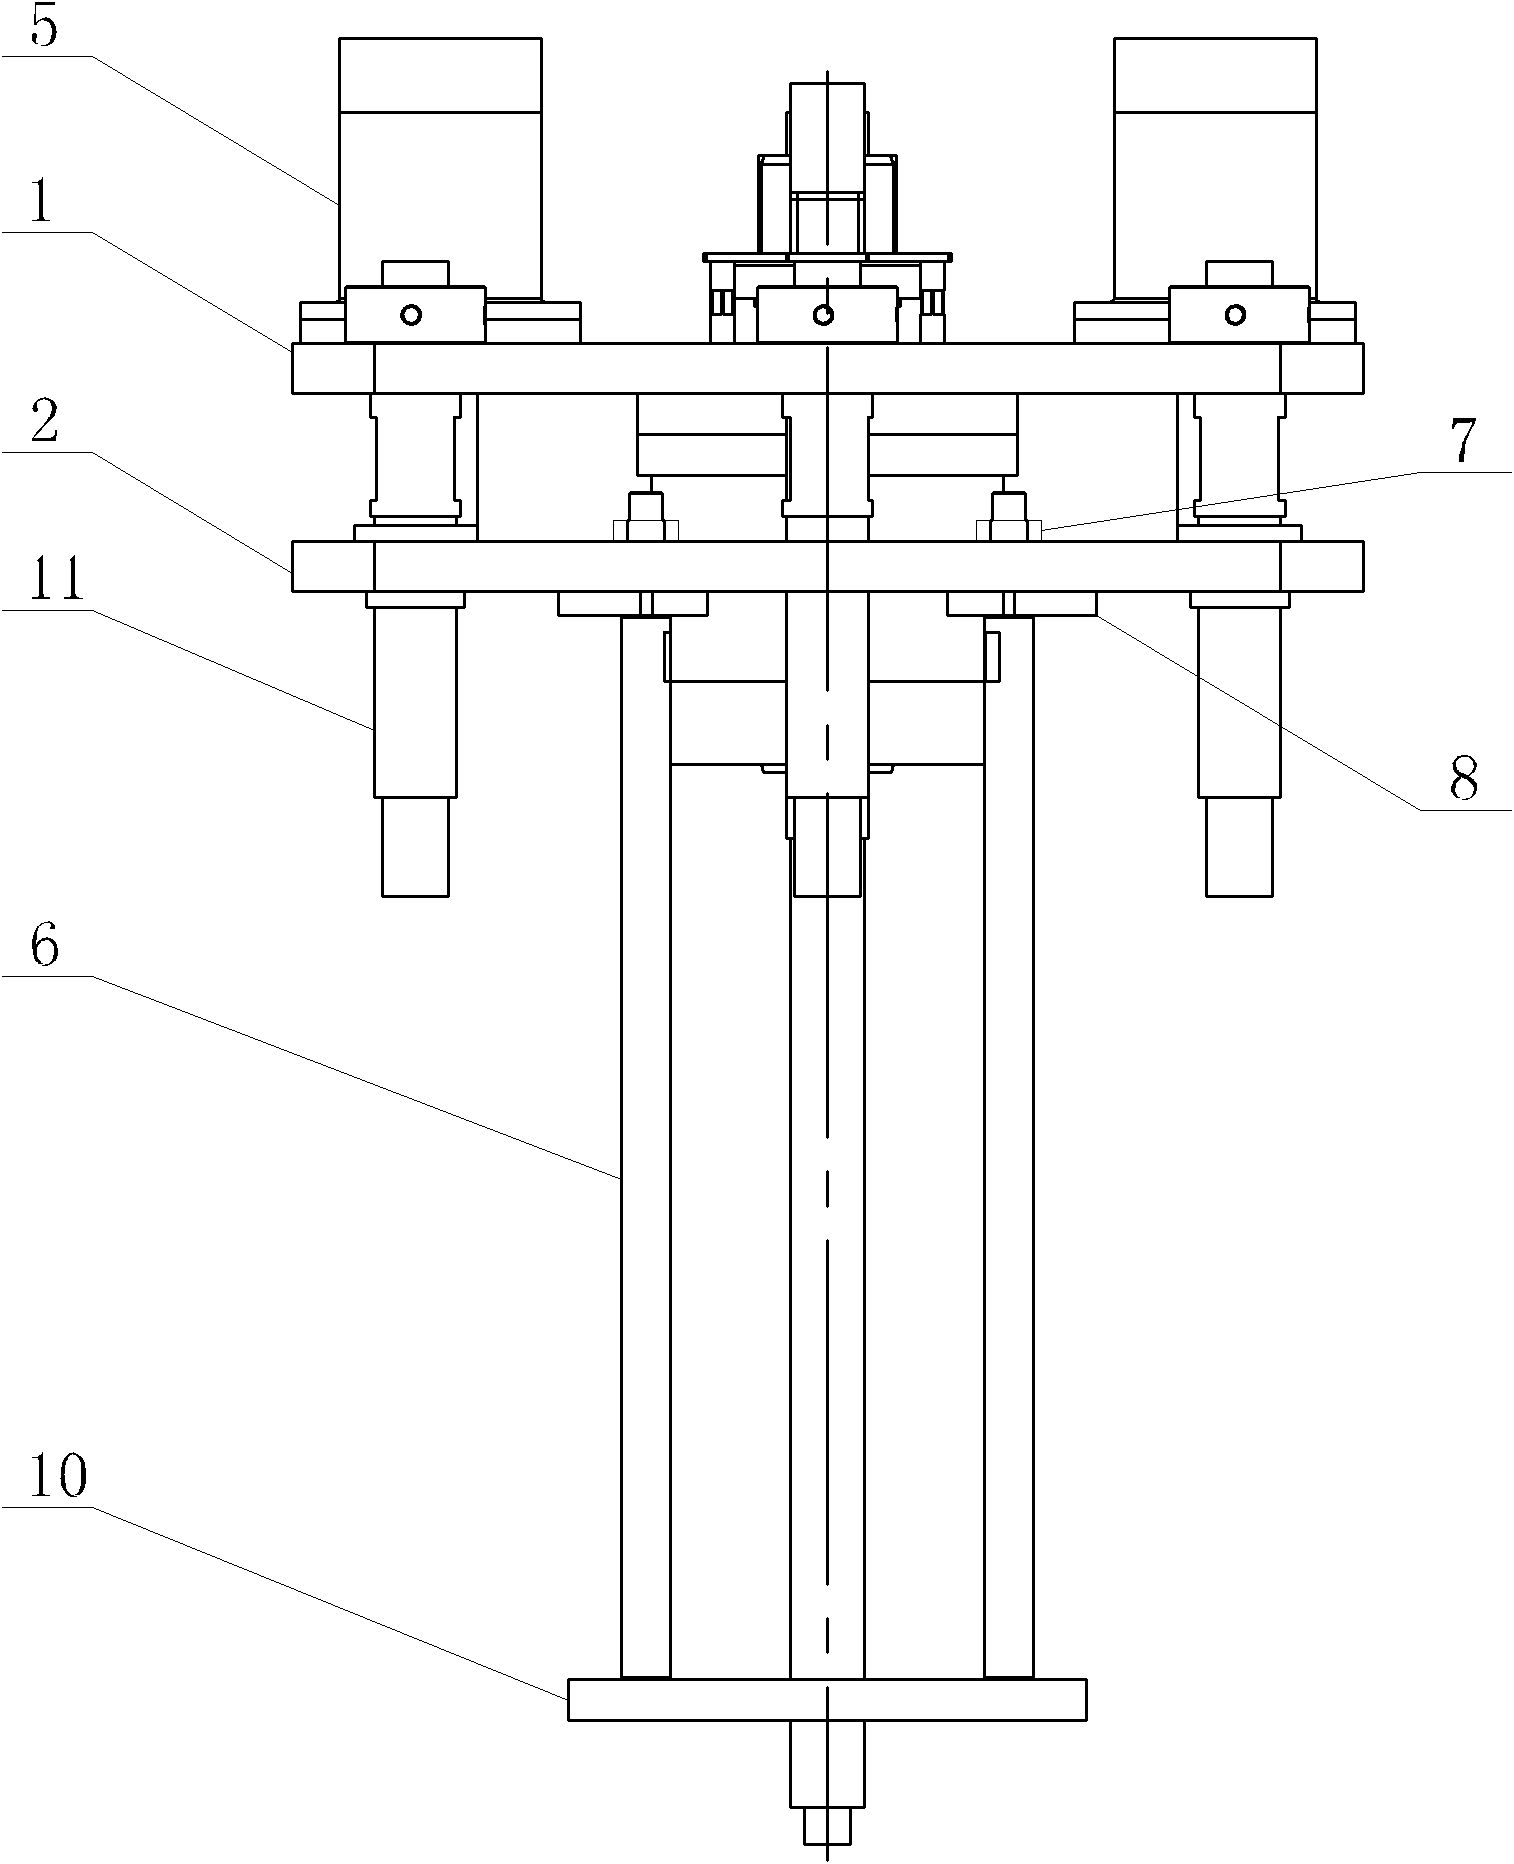 Ejection and secondary extrusion device